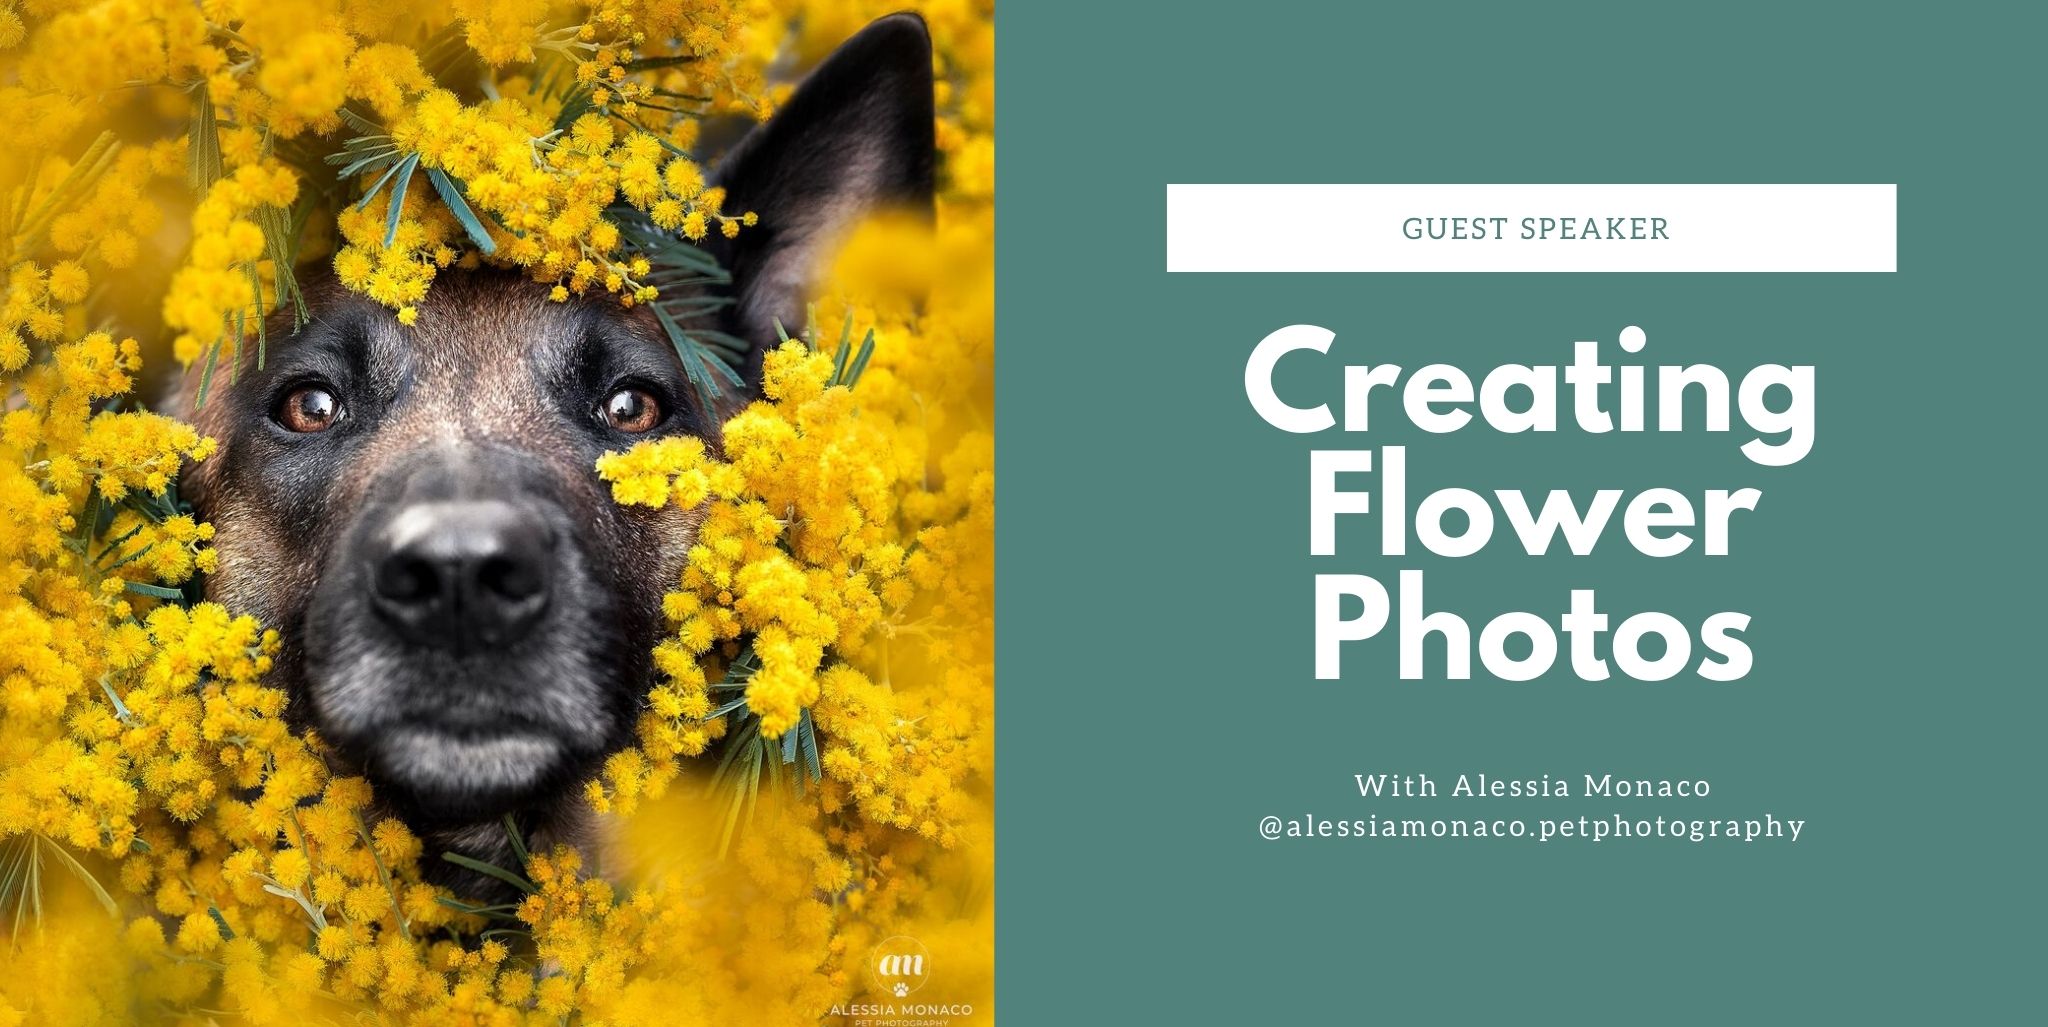 Creating a Flower Photo with Alessia Monaco